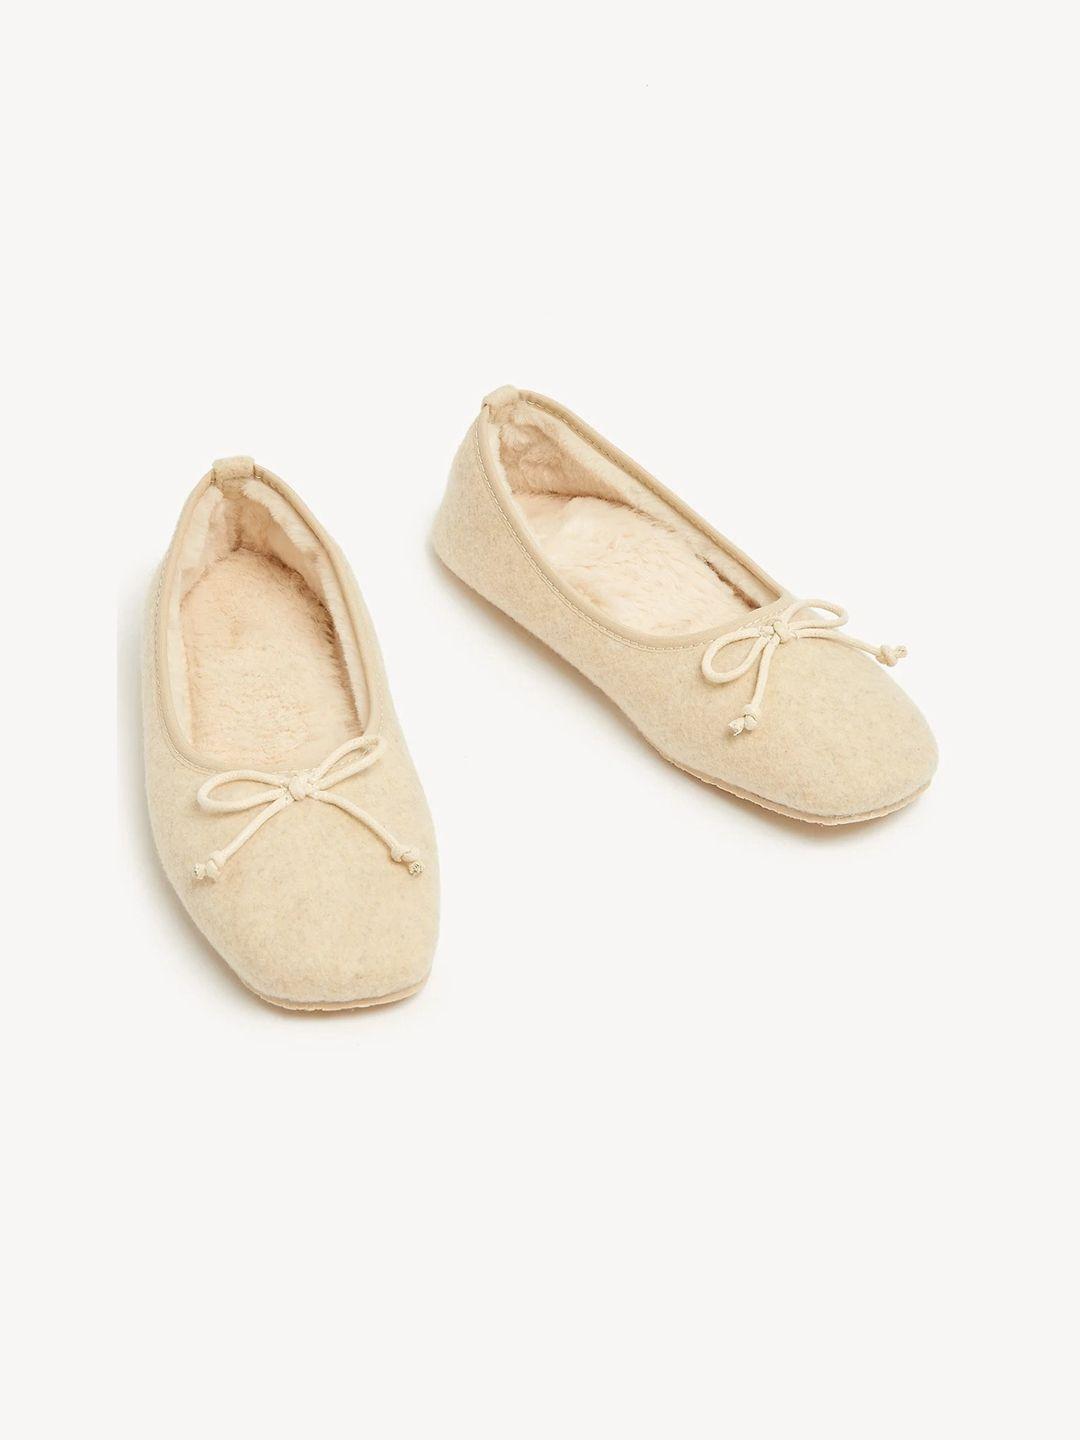 marks & spencer women round toe ballerinas with bows